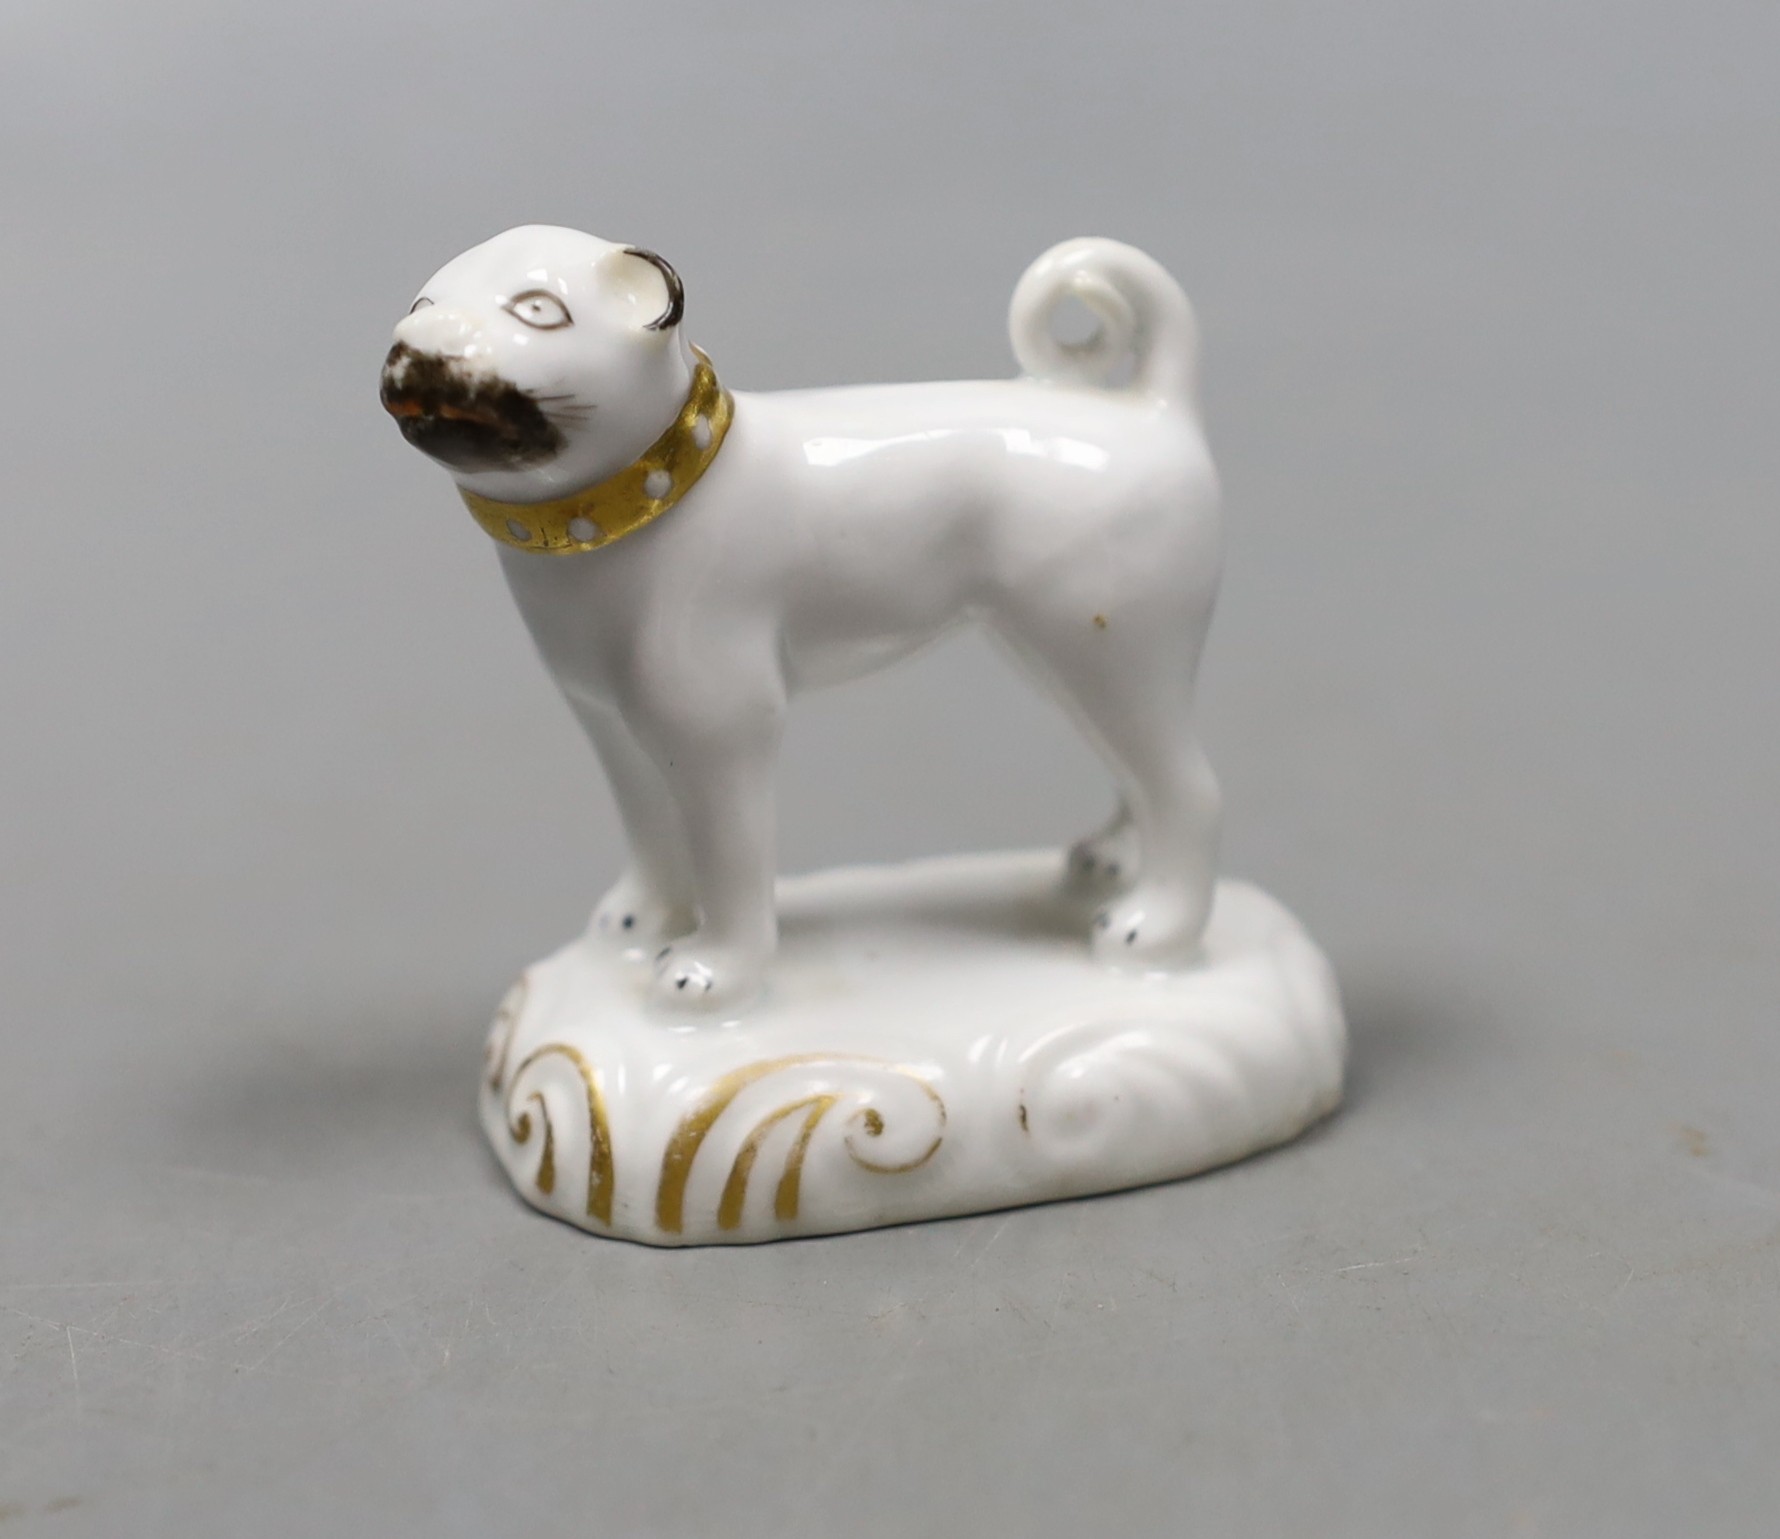 A rare Staffordshire porcelain model of a standing pug, c.1830–50, on a scroll moulded base, Provenance- Dennis G Rice collection